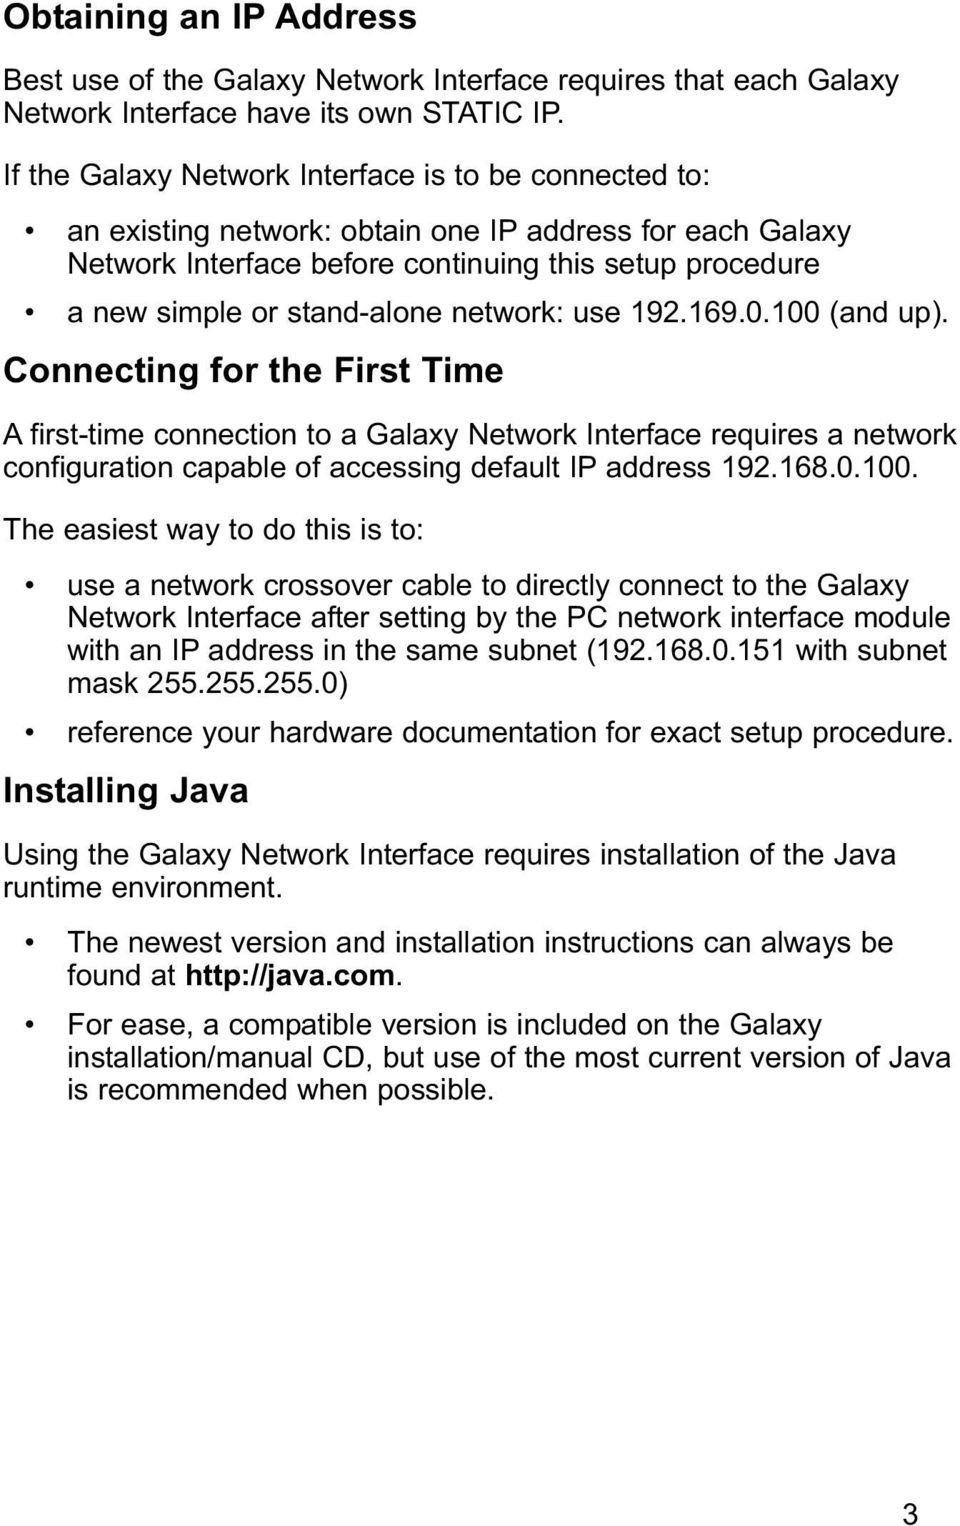 network: use 192.169.0.100 (and up). Connecting for the First Time A first-time connection to a Galaxy Network Interface requires a network configuration capable of accessing default IP address 192.